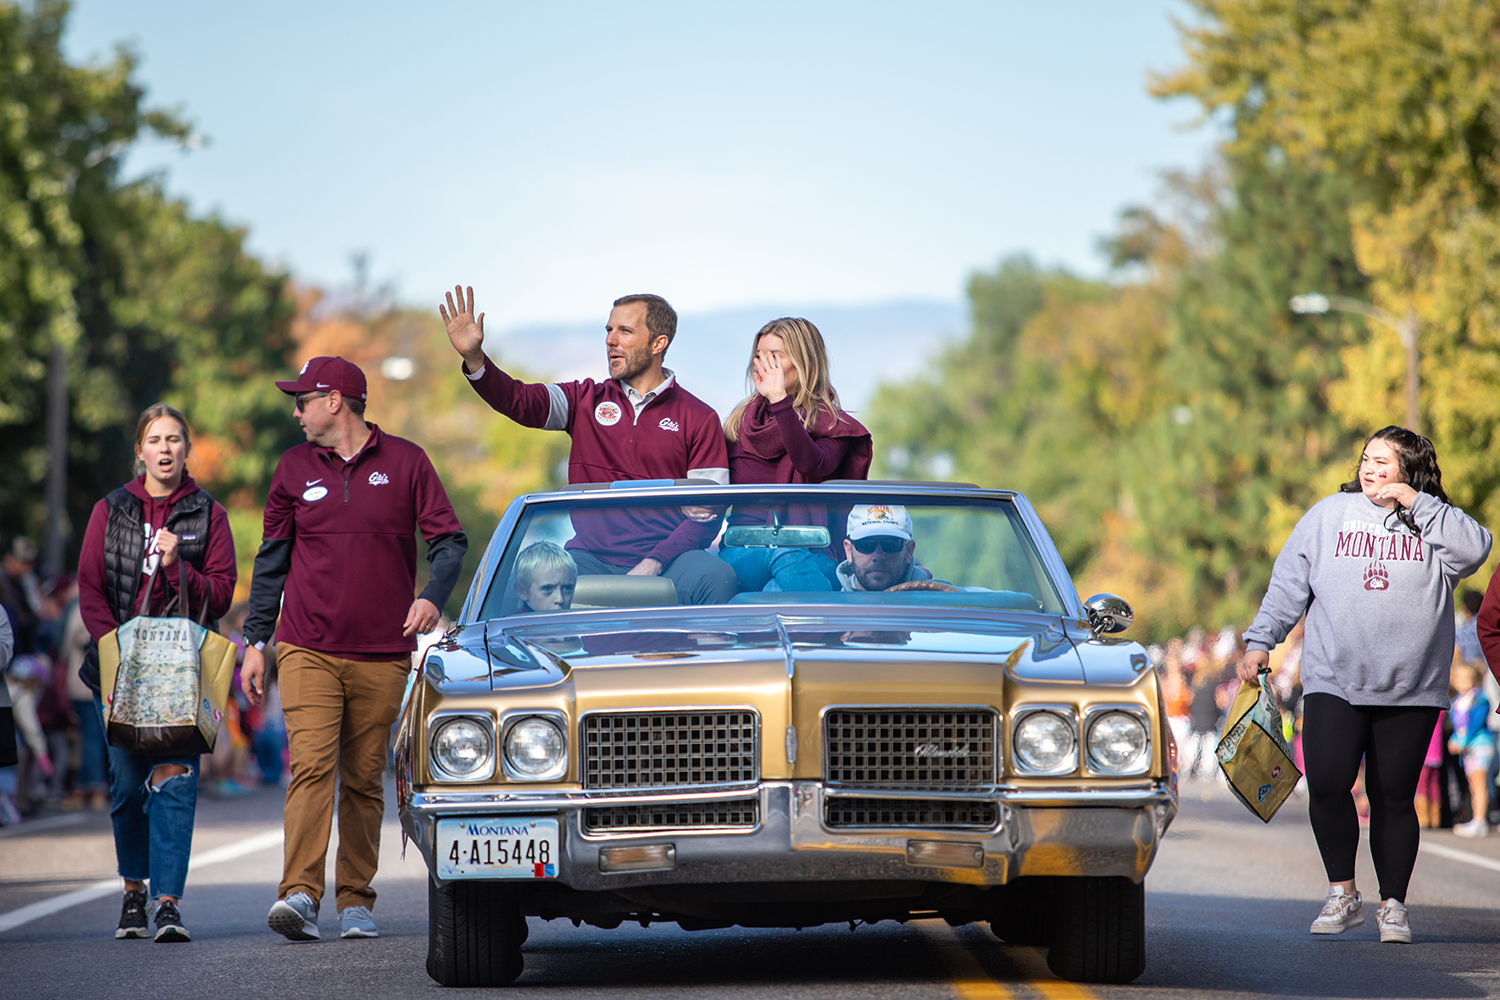 President Bodnar and Dr. Chelsea Bodnar waving from a car during the Homecoming Parde.